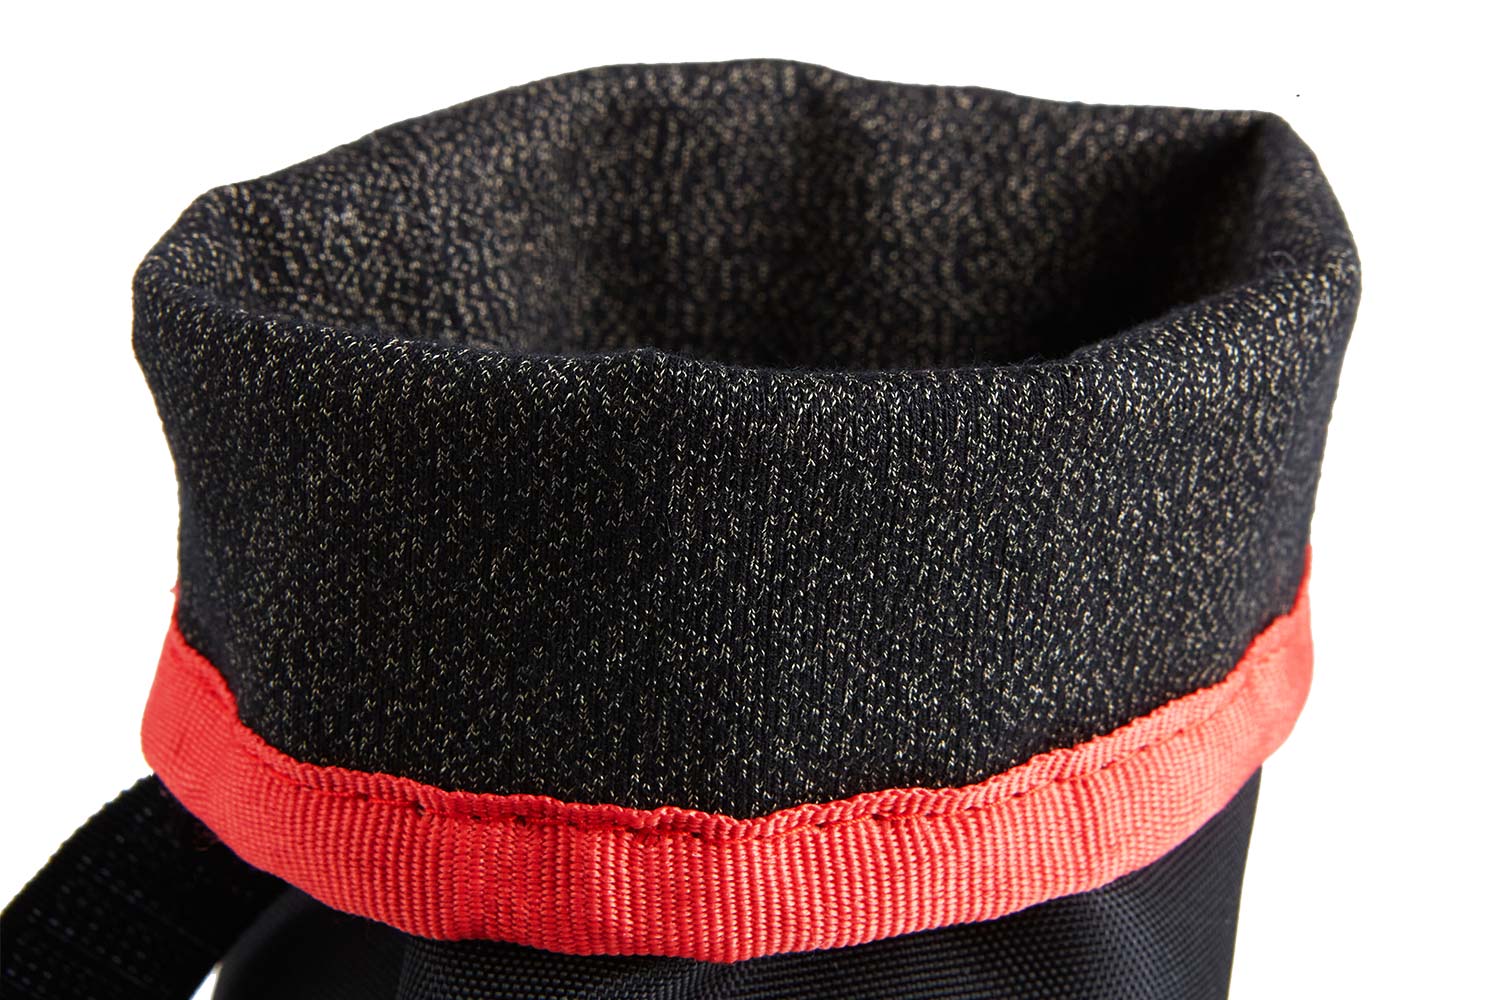 A black and red Your Whole Dog MediPaw: Healing Slim Boot bag with a zipper, perfect for storing your Your Whole Dog MediPaw: Healing Slim Boot items in Australia.